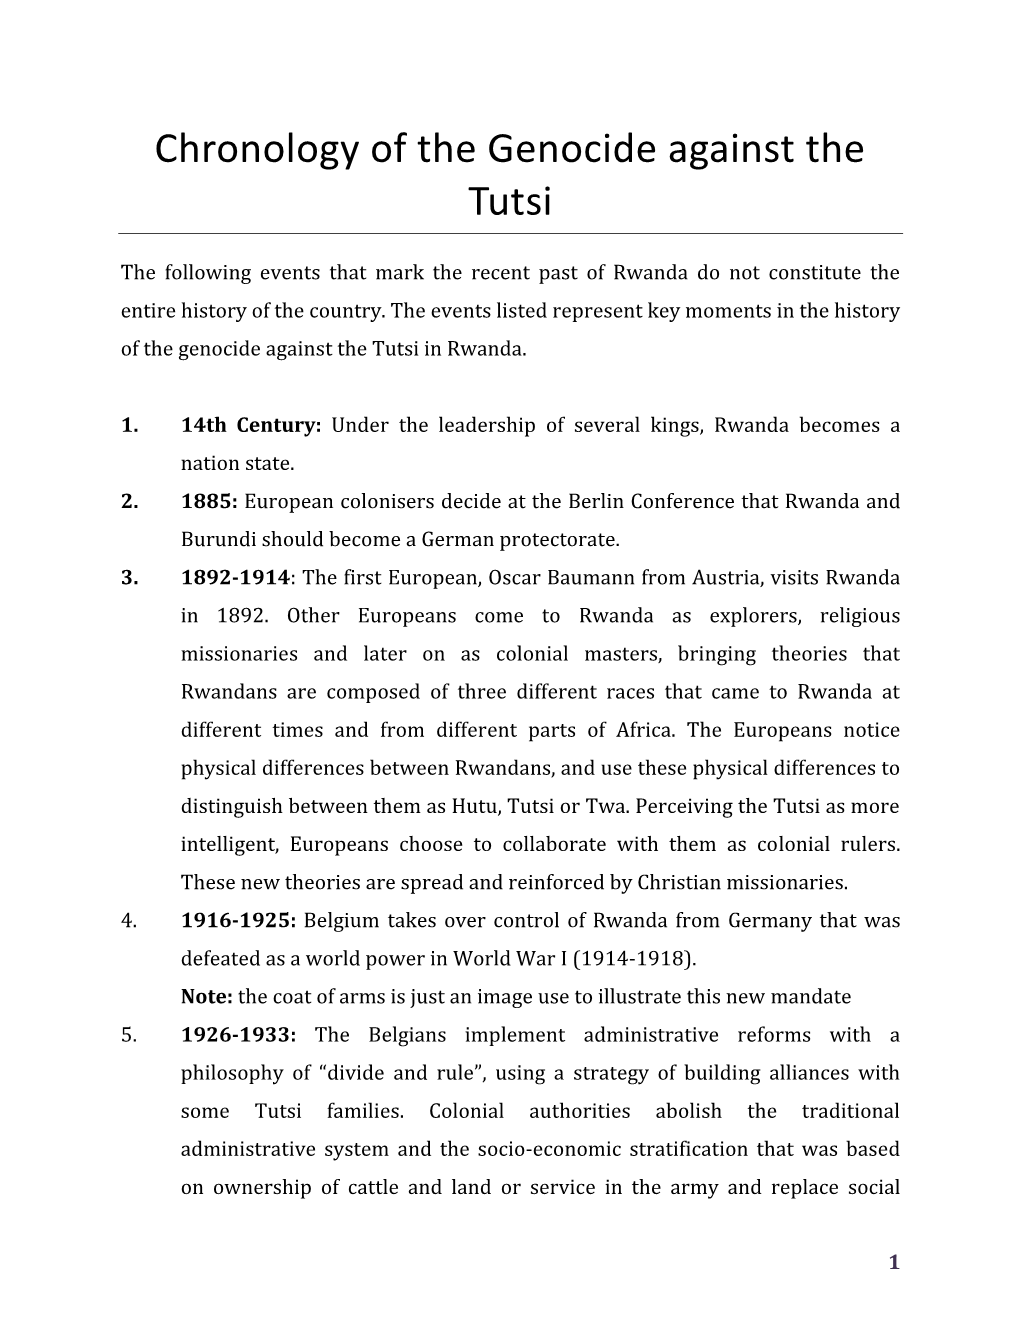 Chronology of the Genocide Against the Tutsi